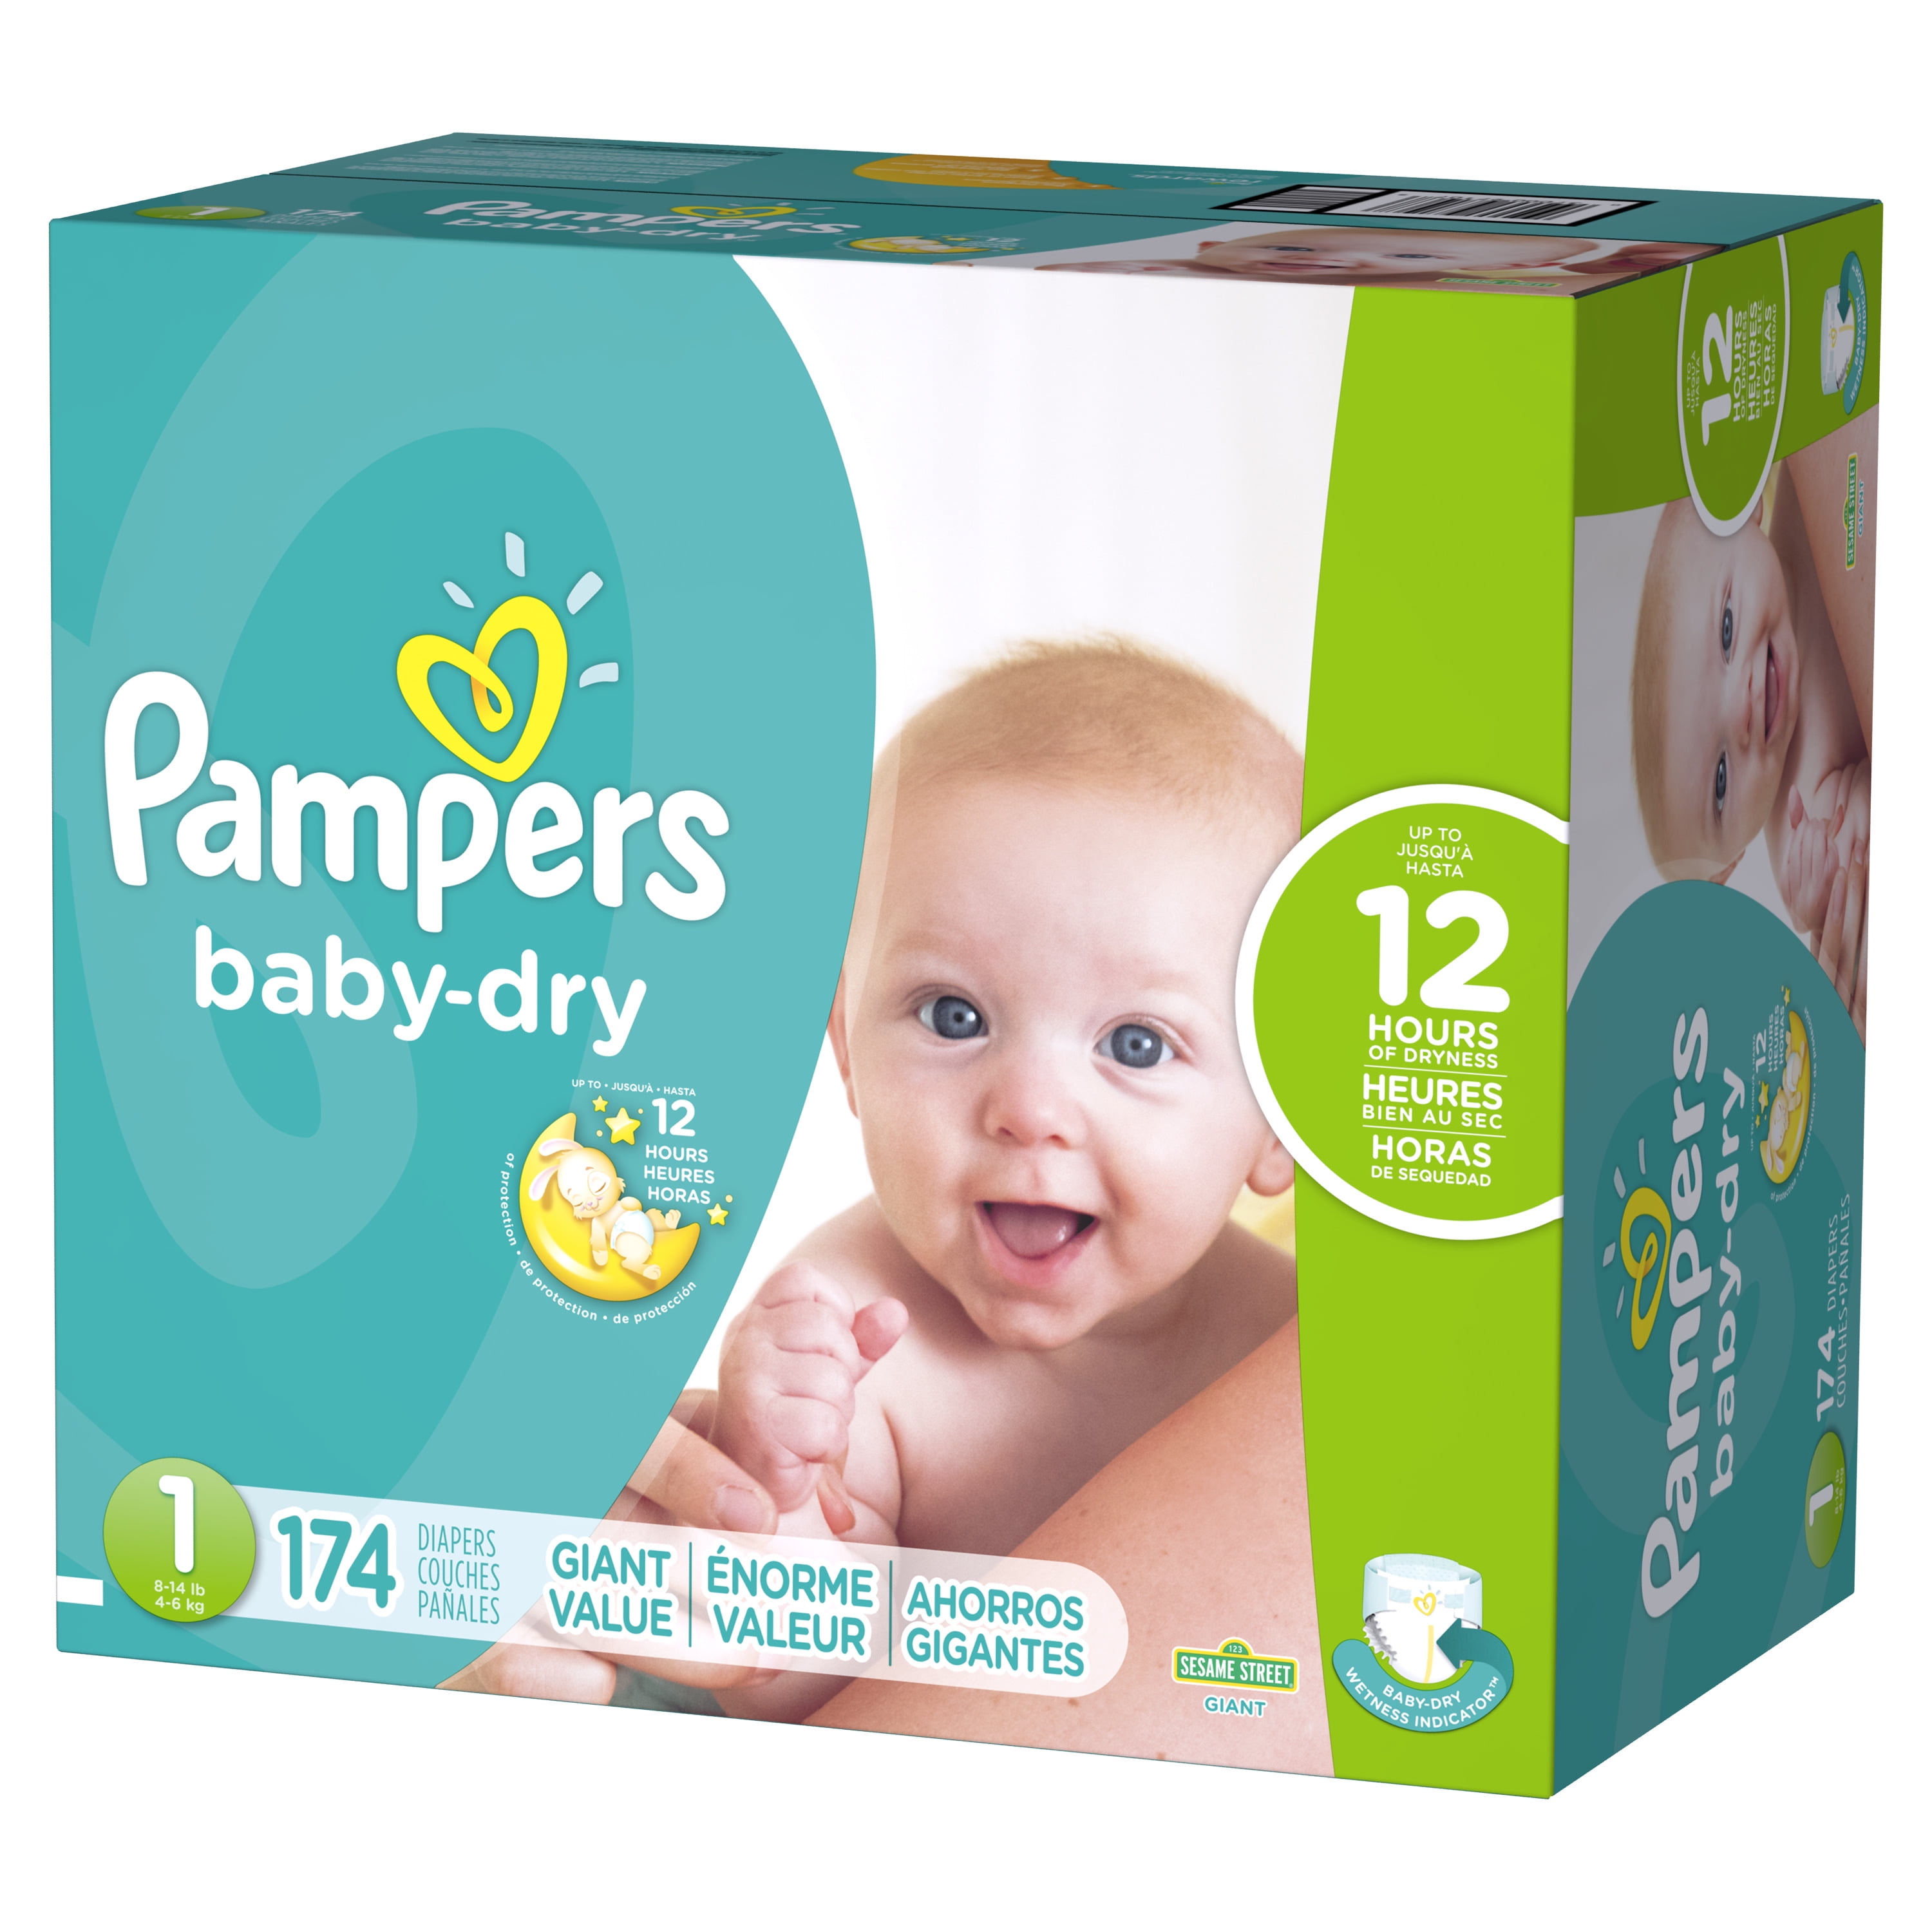 Baby-Dry Diapers Size 1 174 Count - Walmart.com